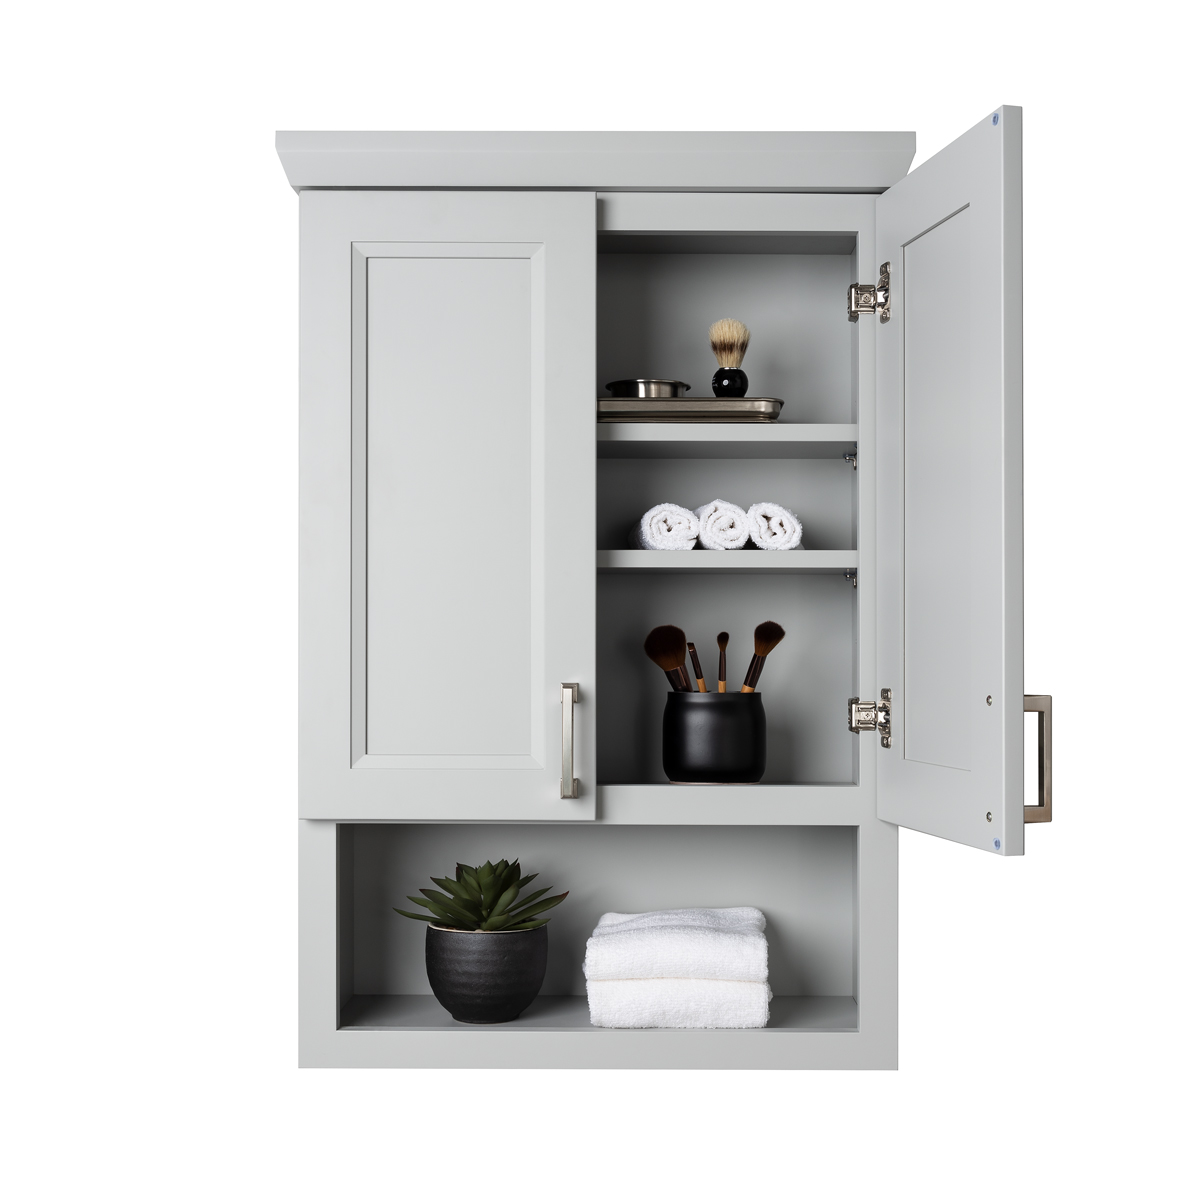 Linen Towers and Accessories - Stonewood Bath Cabinetry